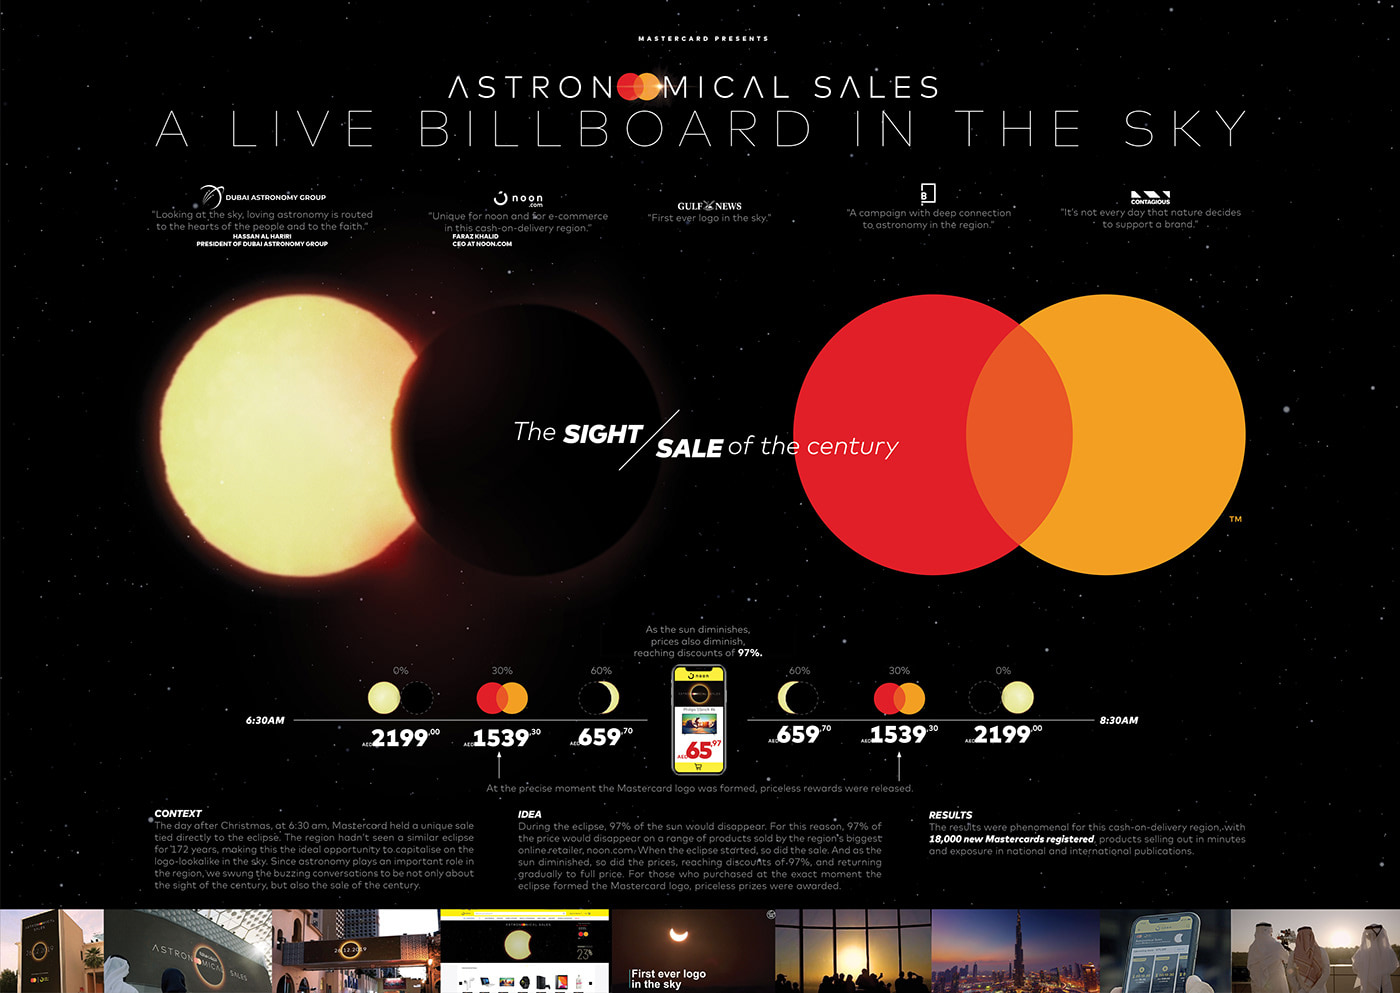 Astronomical Sales by Mastercard